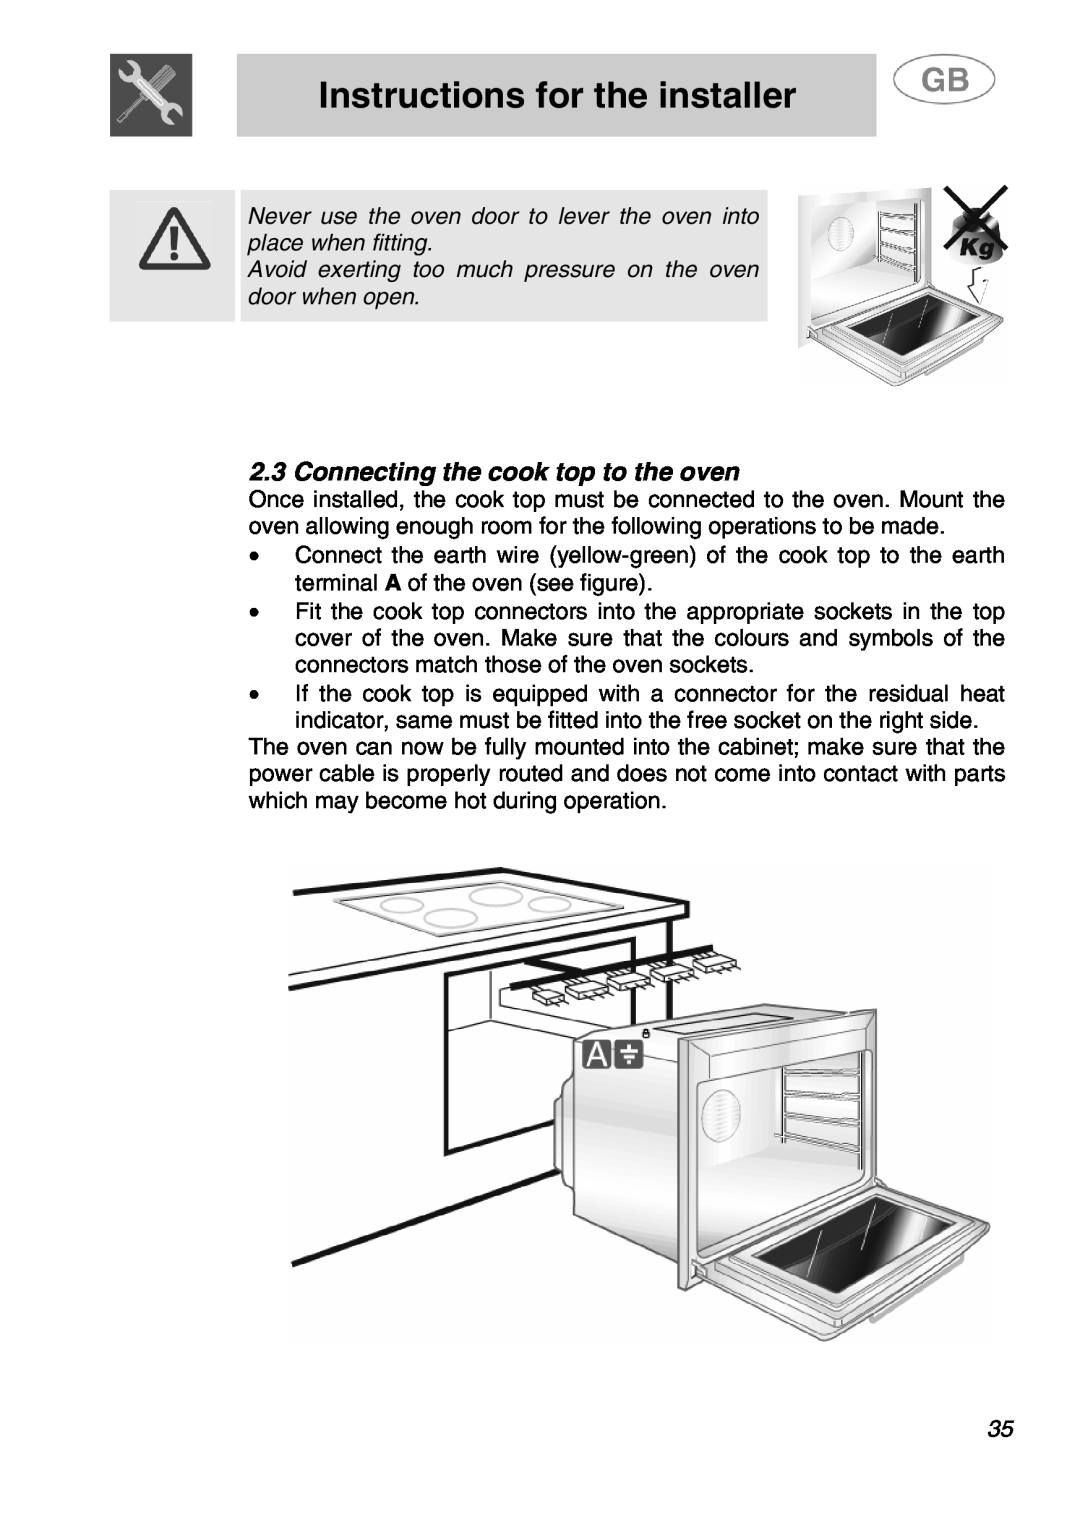 Smeg SA280X manual 2.3Connecting the cook top to the oven, Instructions for the installer 